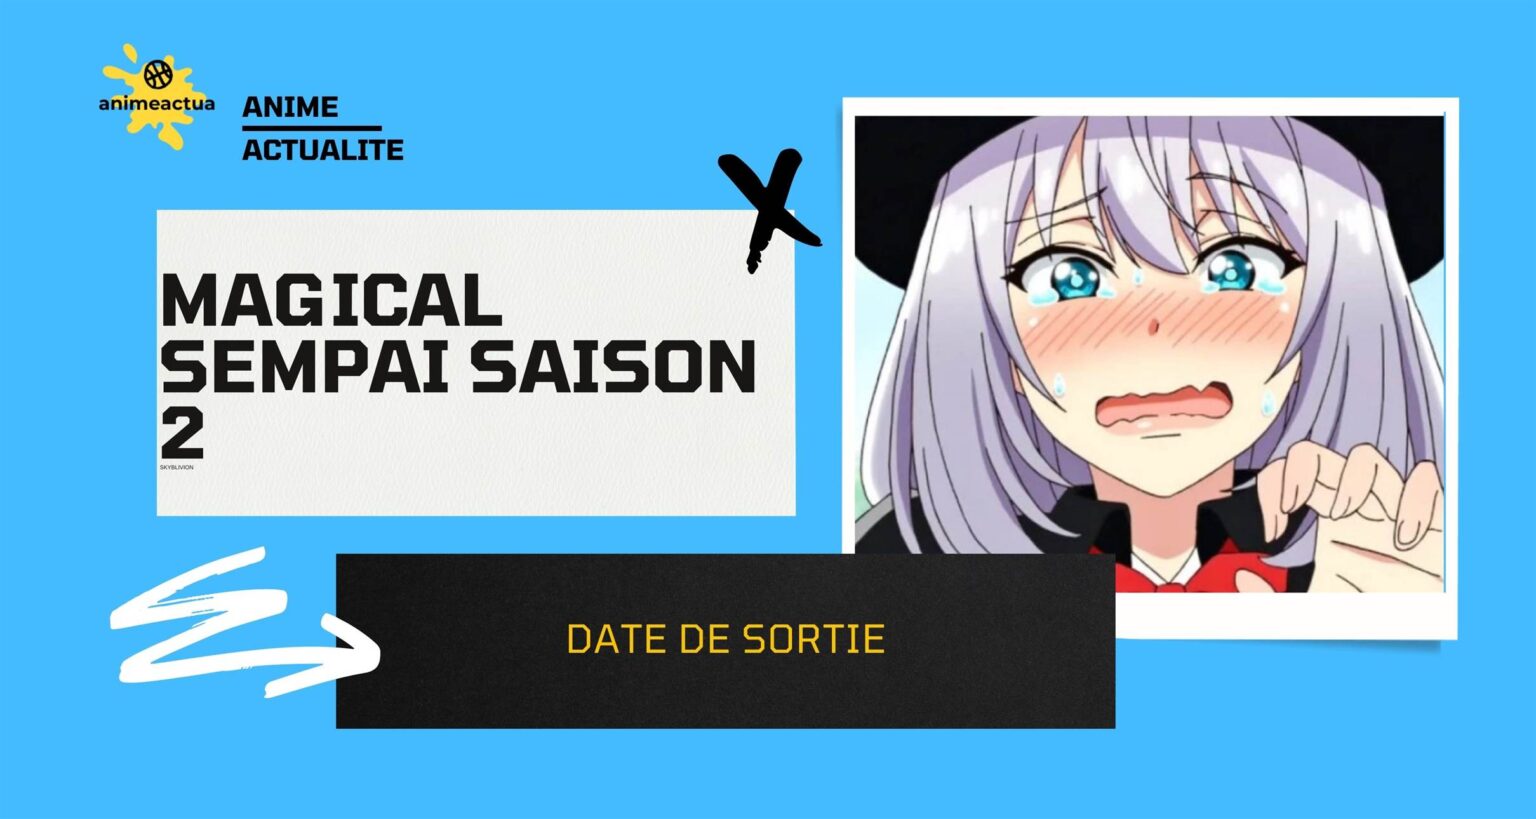 will there be a magical sempai season 2